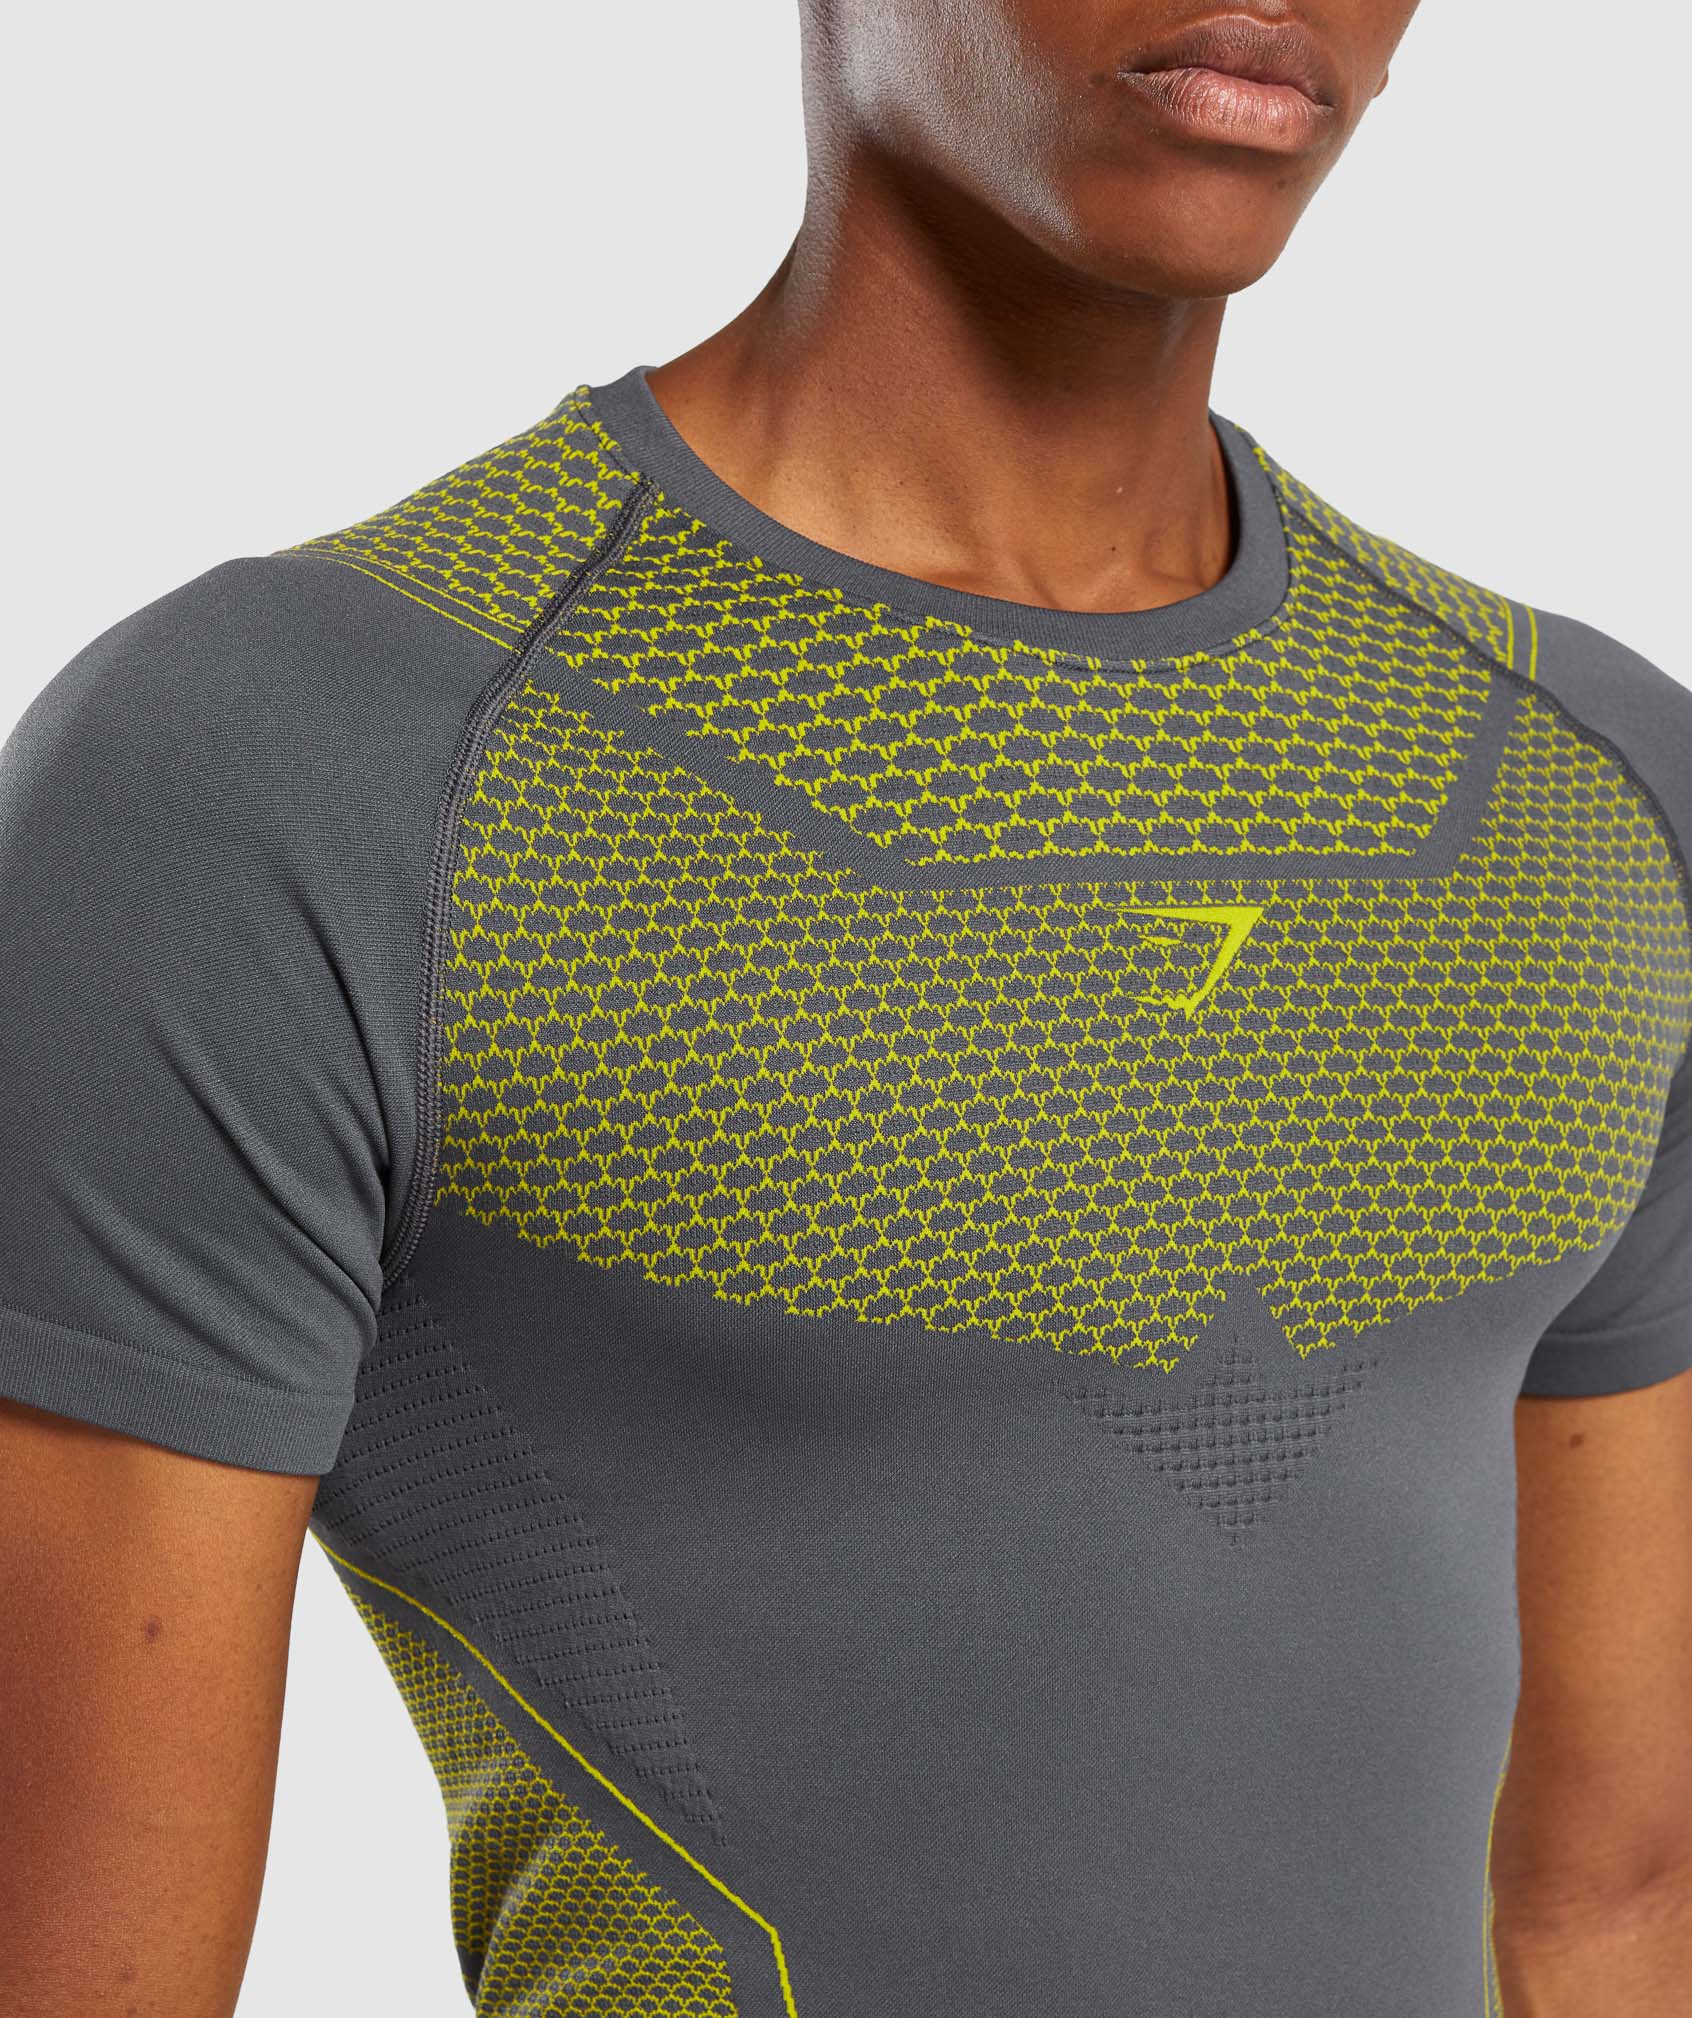 Onyx T-Shirt in Charcoal/Lime - view 6